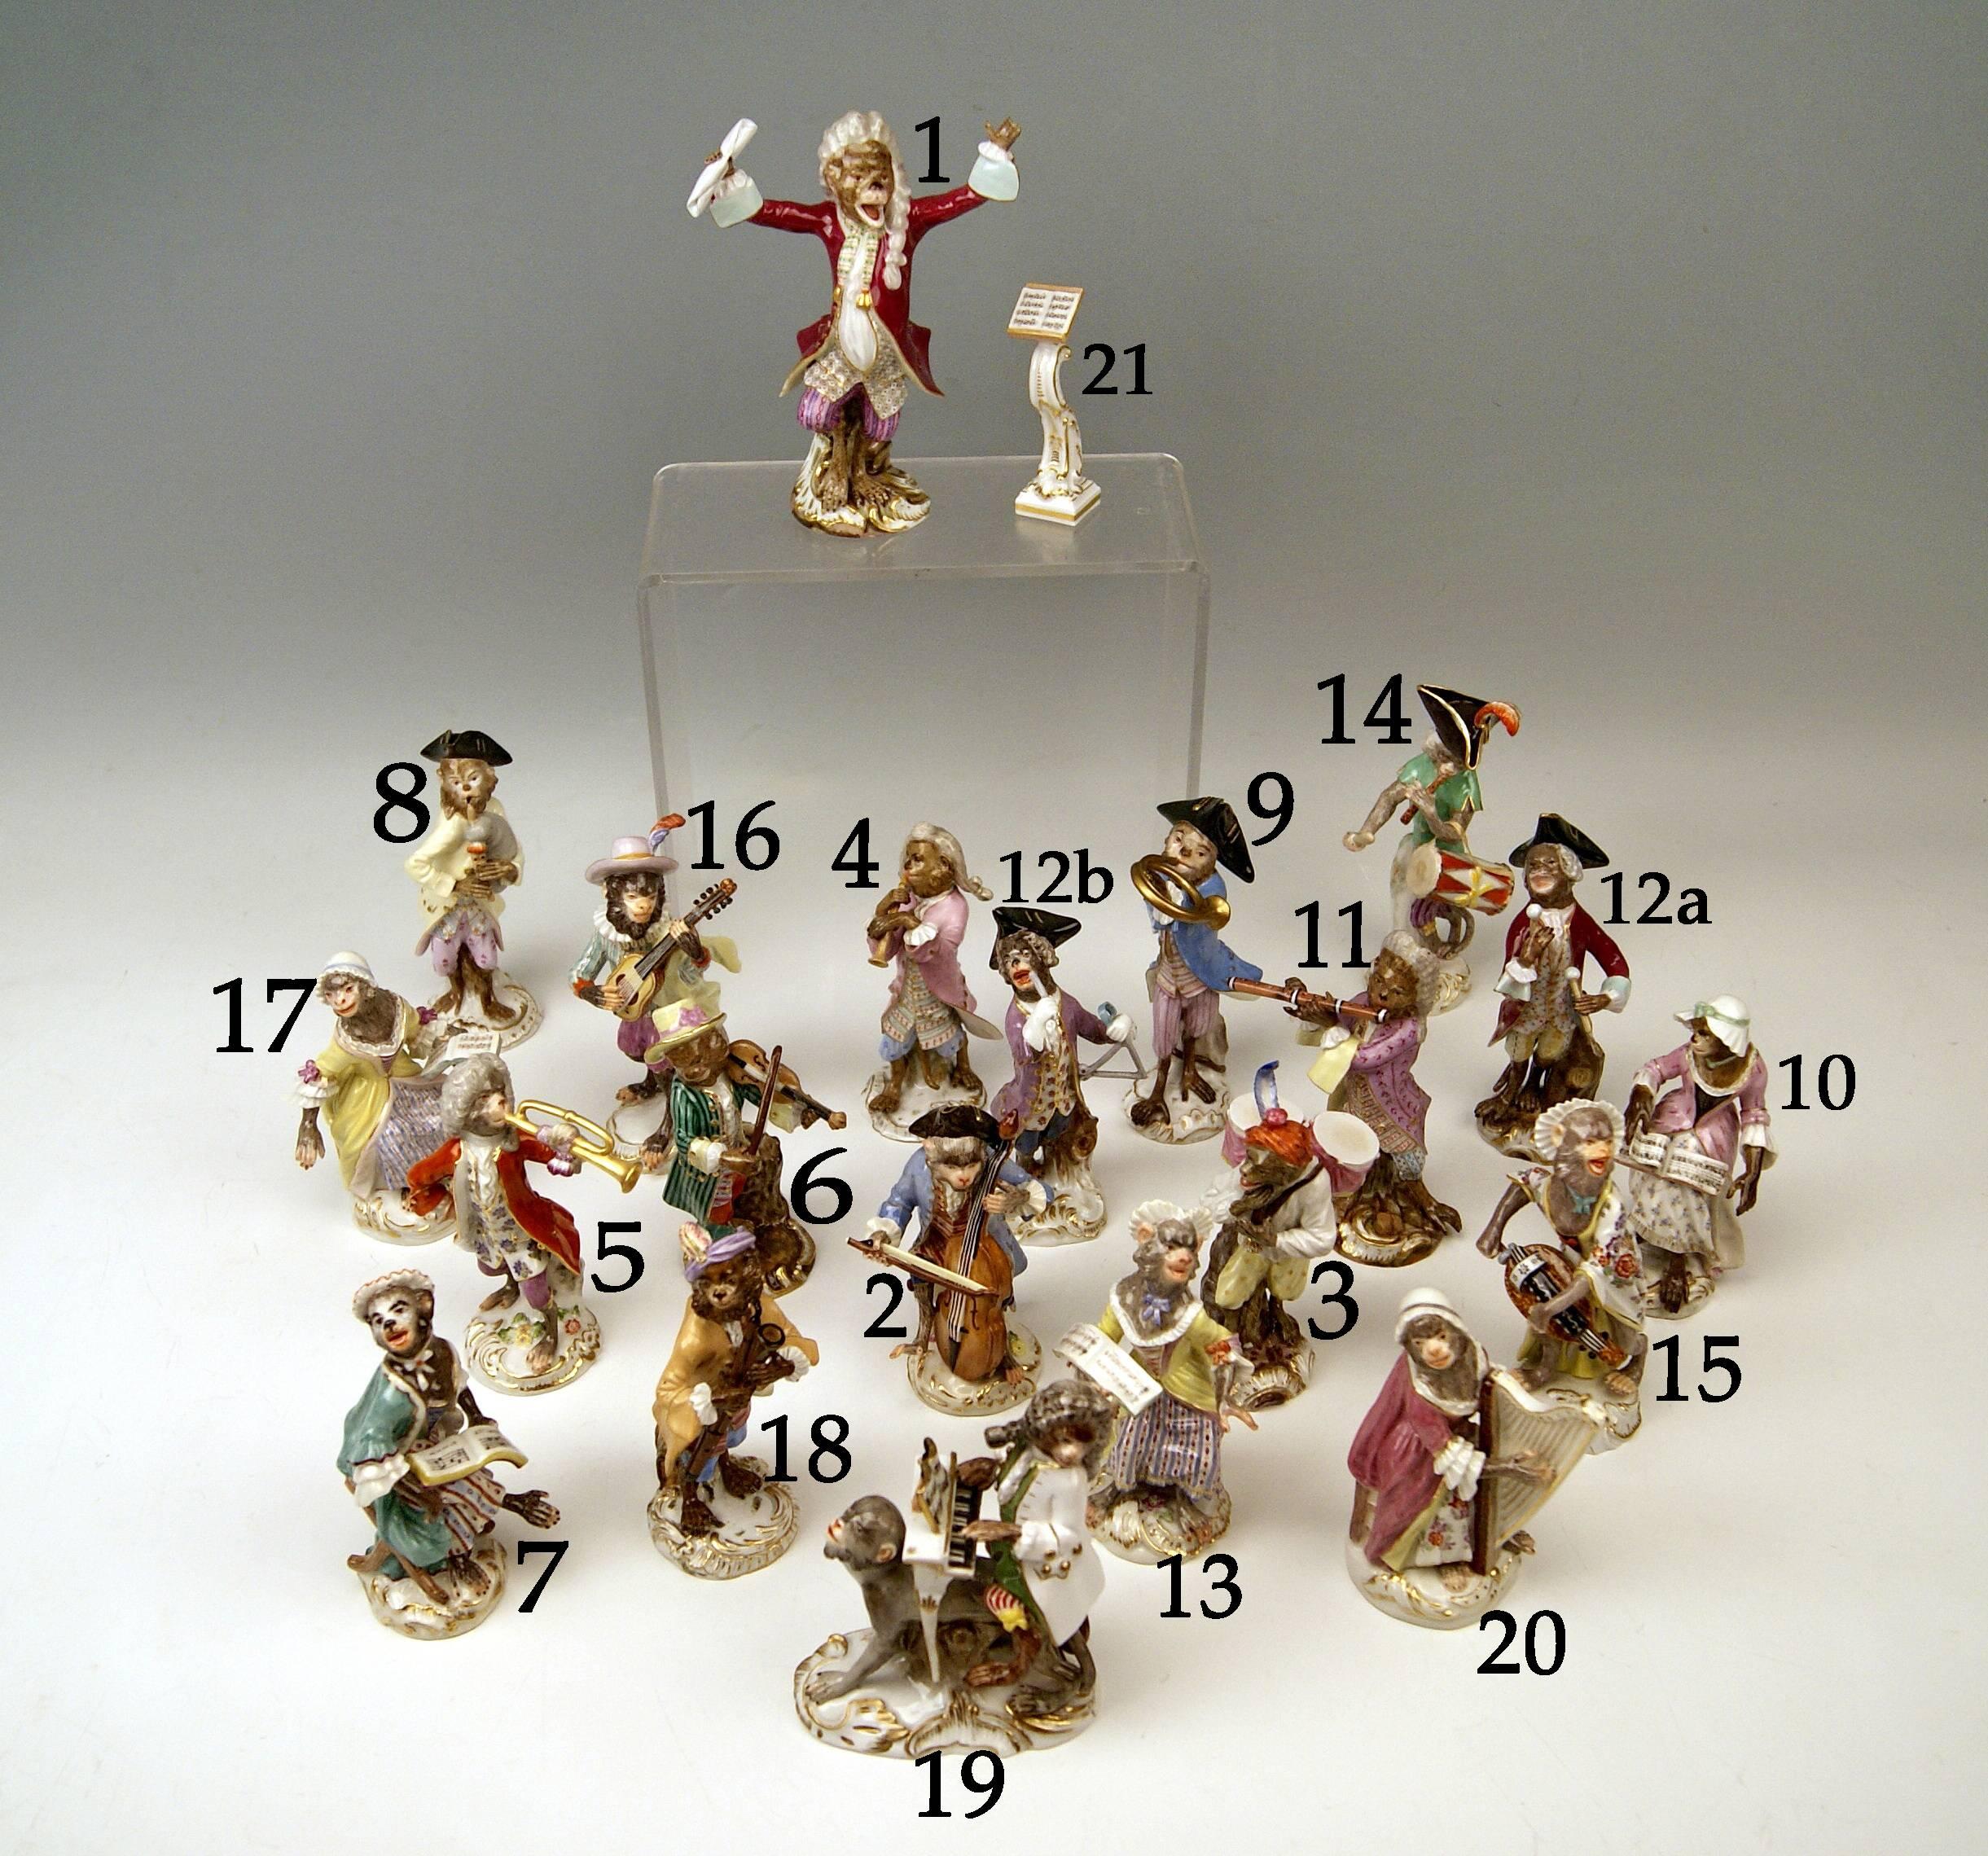 Meissen Gorgeous Group of Figurines 'Monkey Orchestra’ once created by Johann Joachim Kaendler (1706-1775): 21 figurines and conductors stand. 

measures / dimensions: 
average height of figurines: circa 12.5 - 13.0 cm  /  4.72 - 5.11 inches